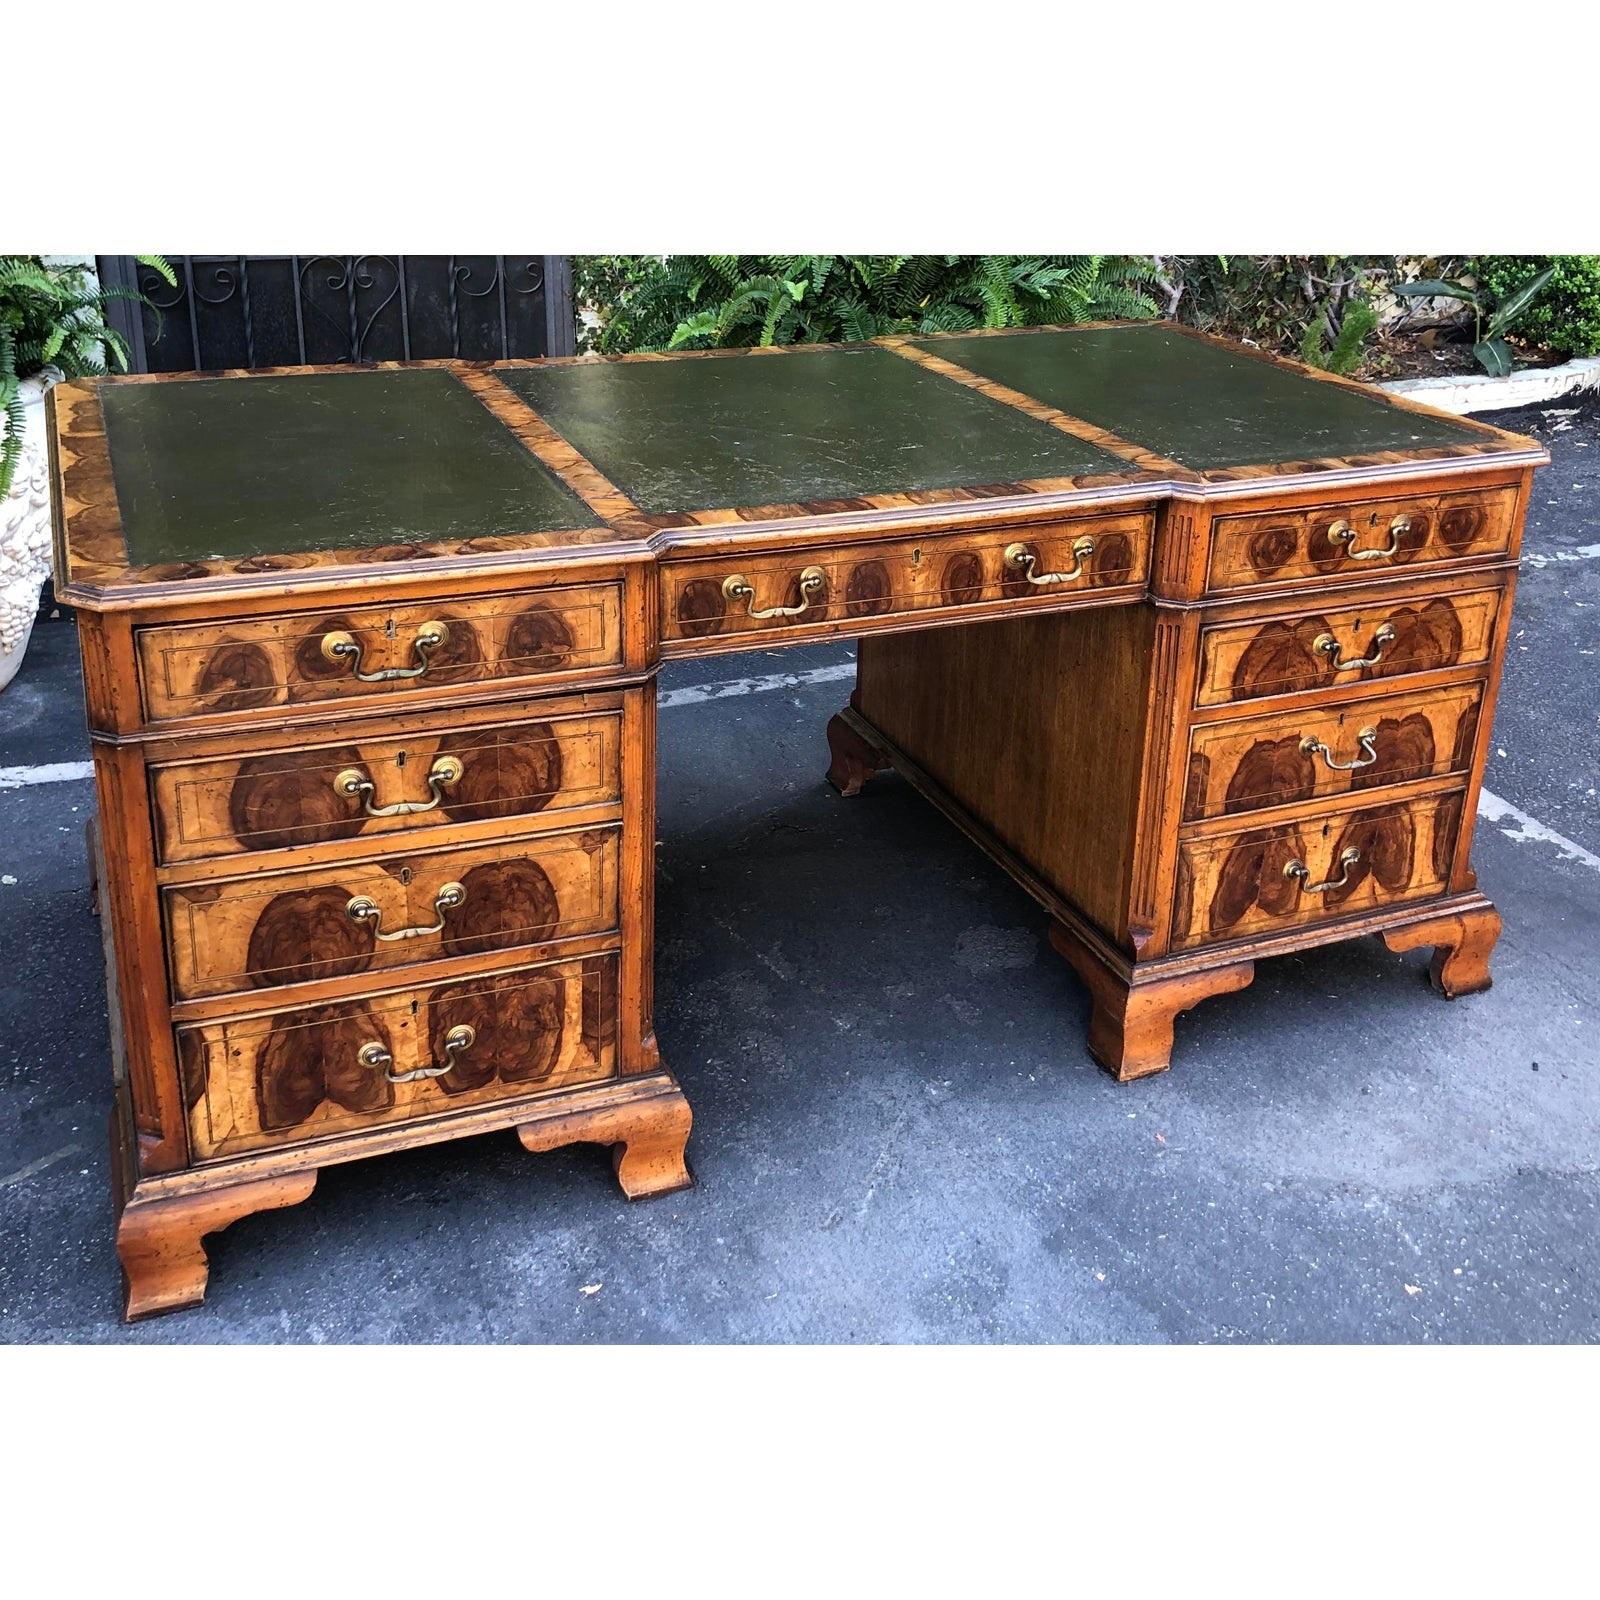 Antique English oyster burl partners desk by Hideaway House of Beverly Hills. Both sides featuring fully functioning drawers. Updated drawers by Hideaway House in the 1990s.